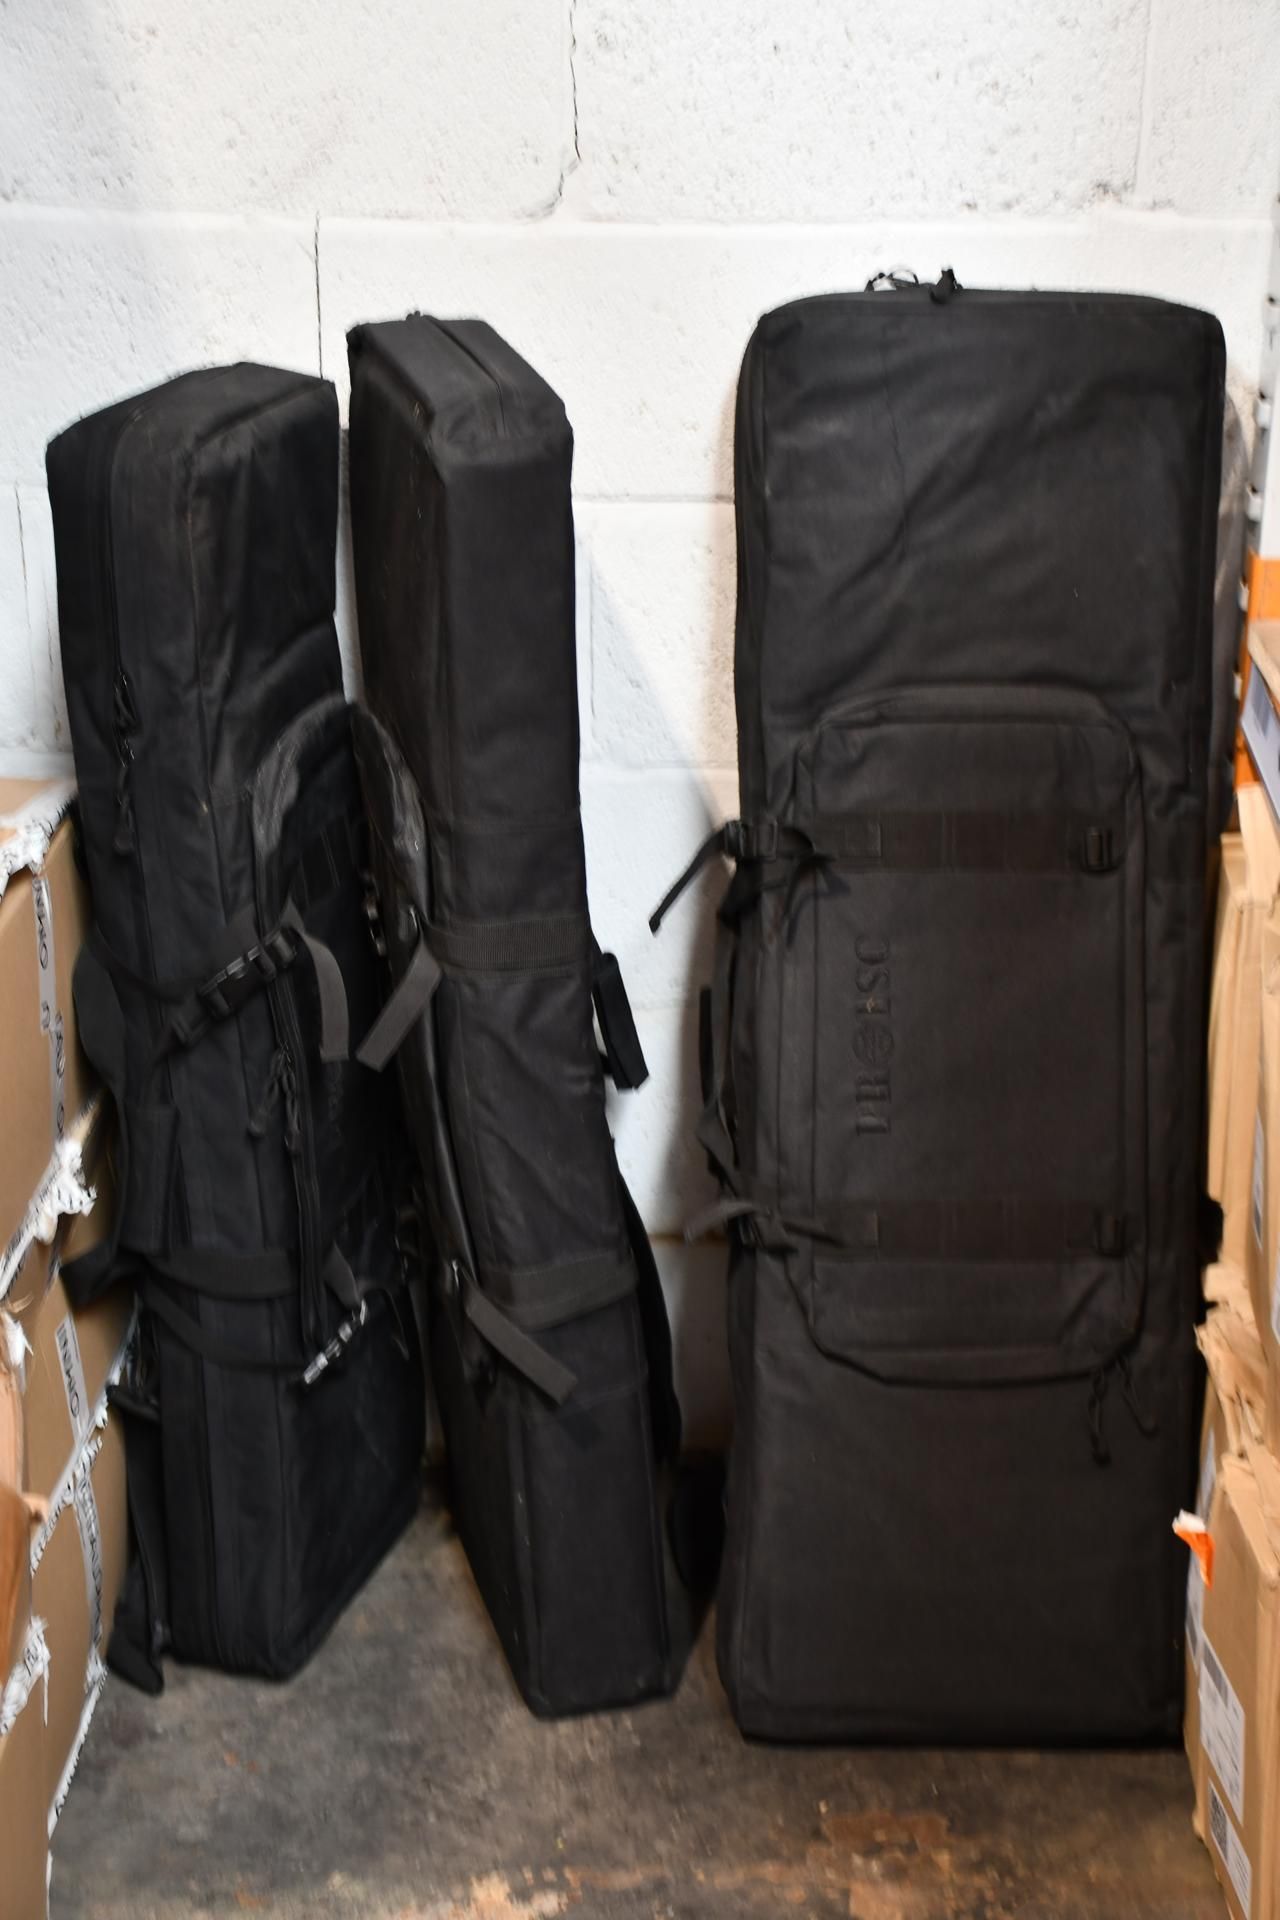 Three Protsc Oblong Gun Bag with Padded inside, Black, Large Oblong. Used, Viewing Advised.